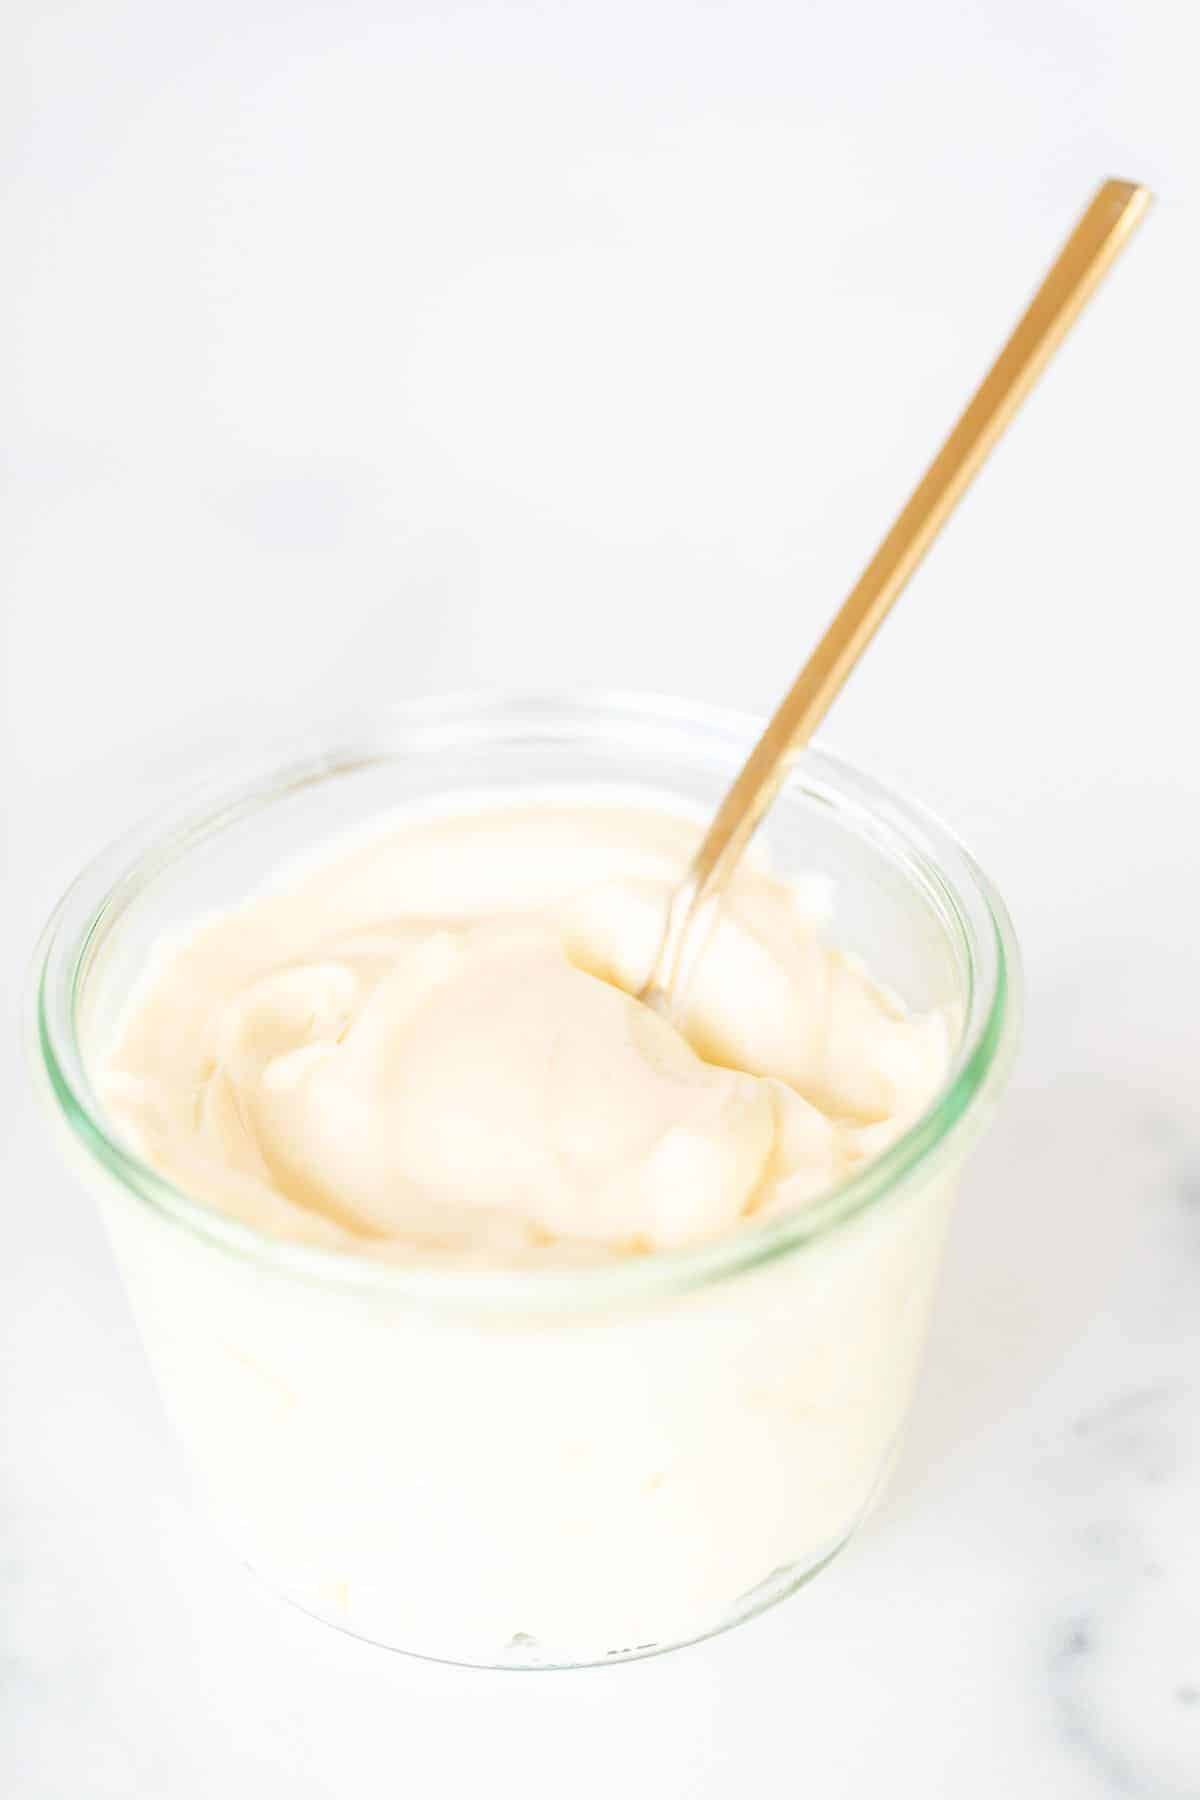 A clear glass container full of homemade mayonnaise, on a marble surface, gold spoon inside bowl.